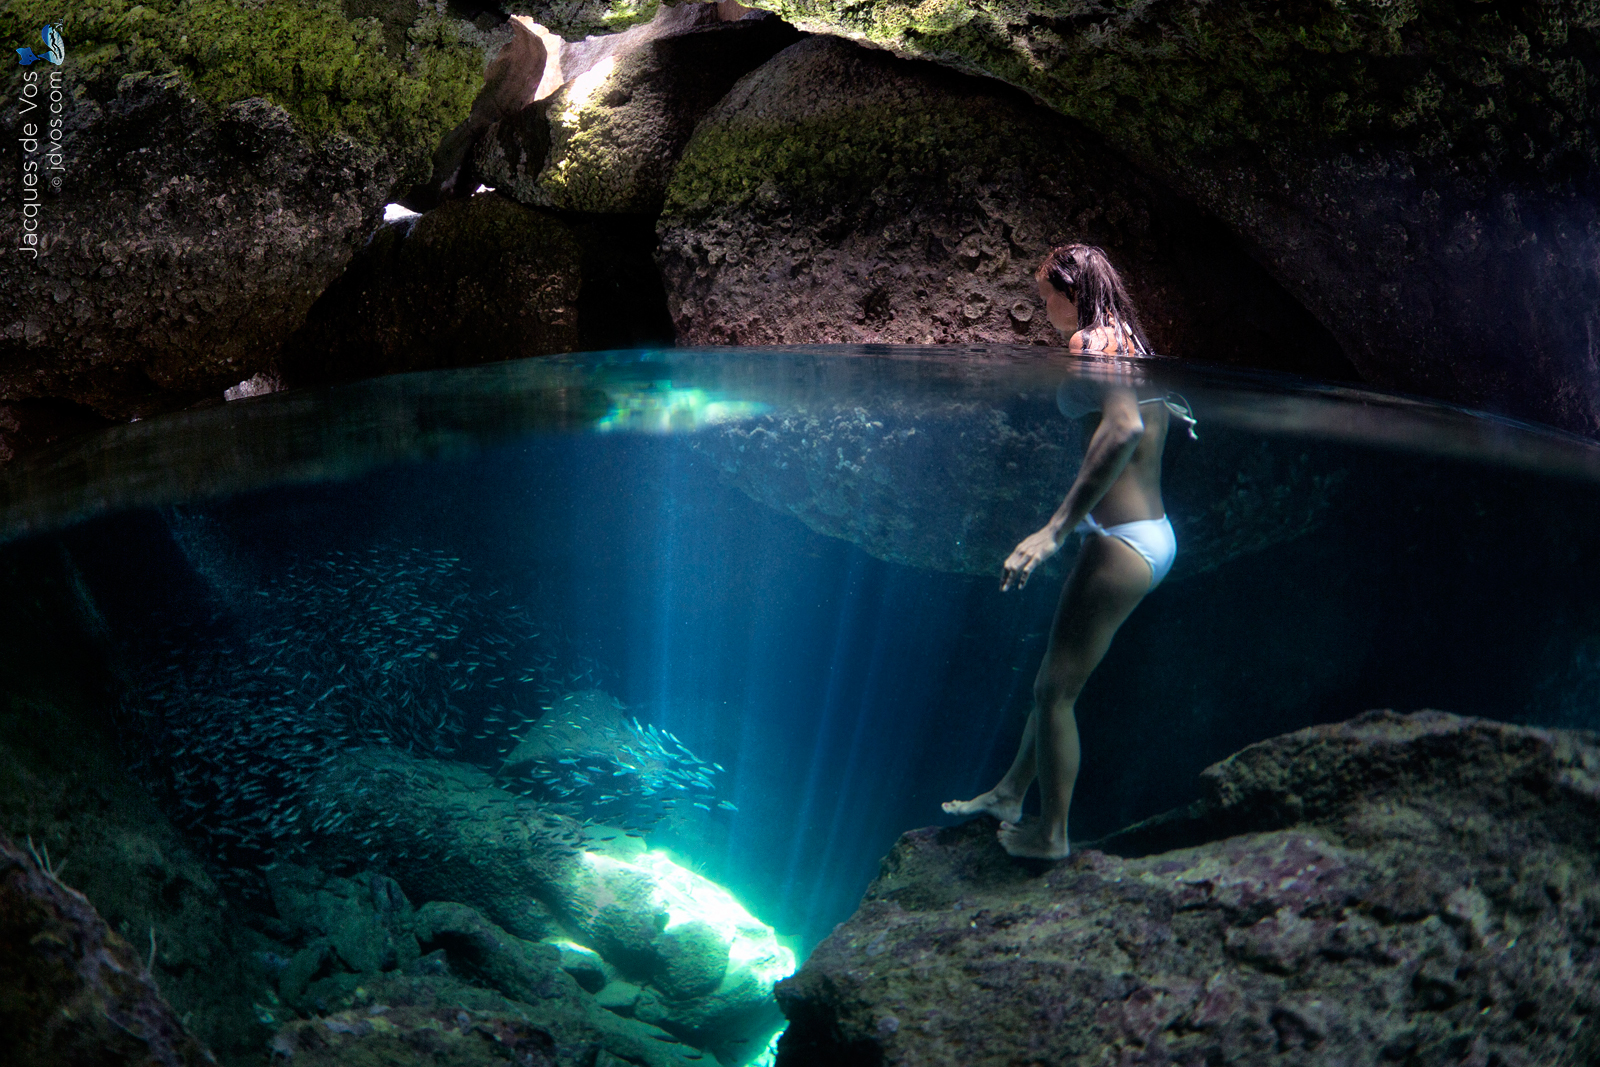 The Story Behind This Dreamy Underwater Cave Split-Shot